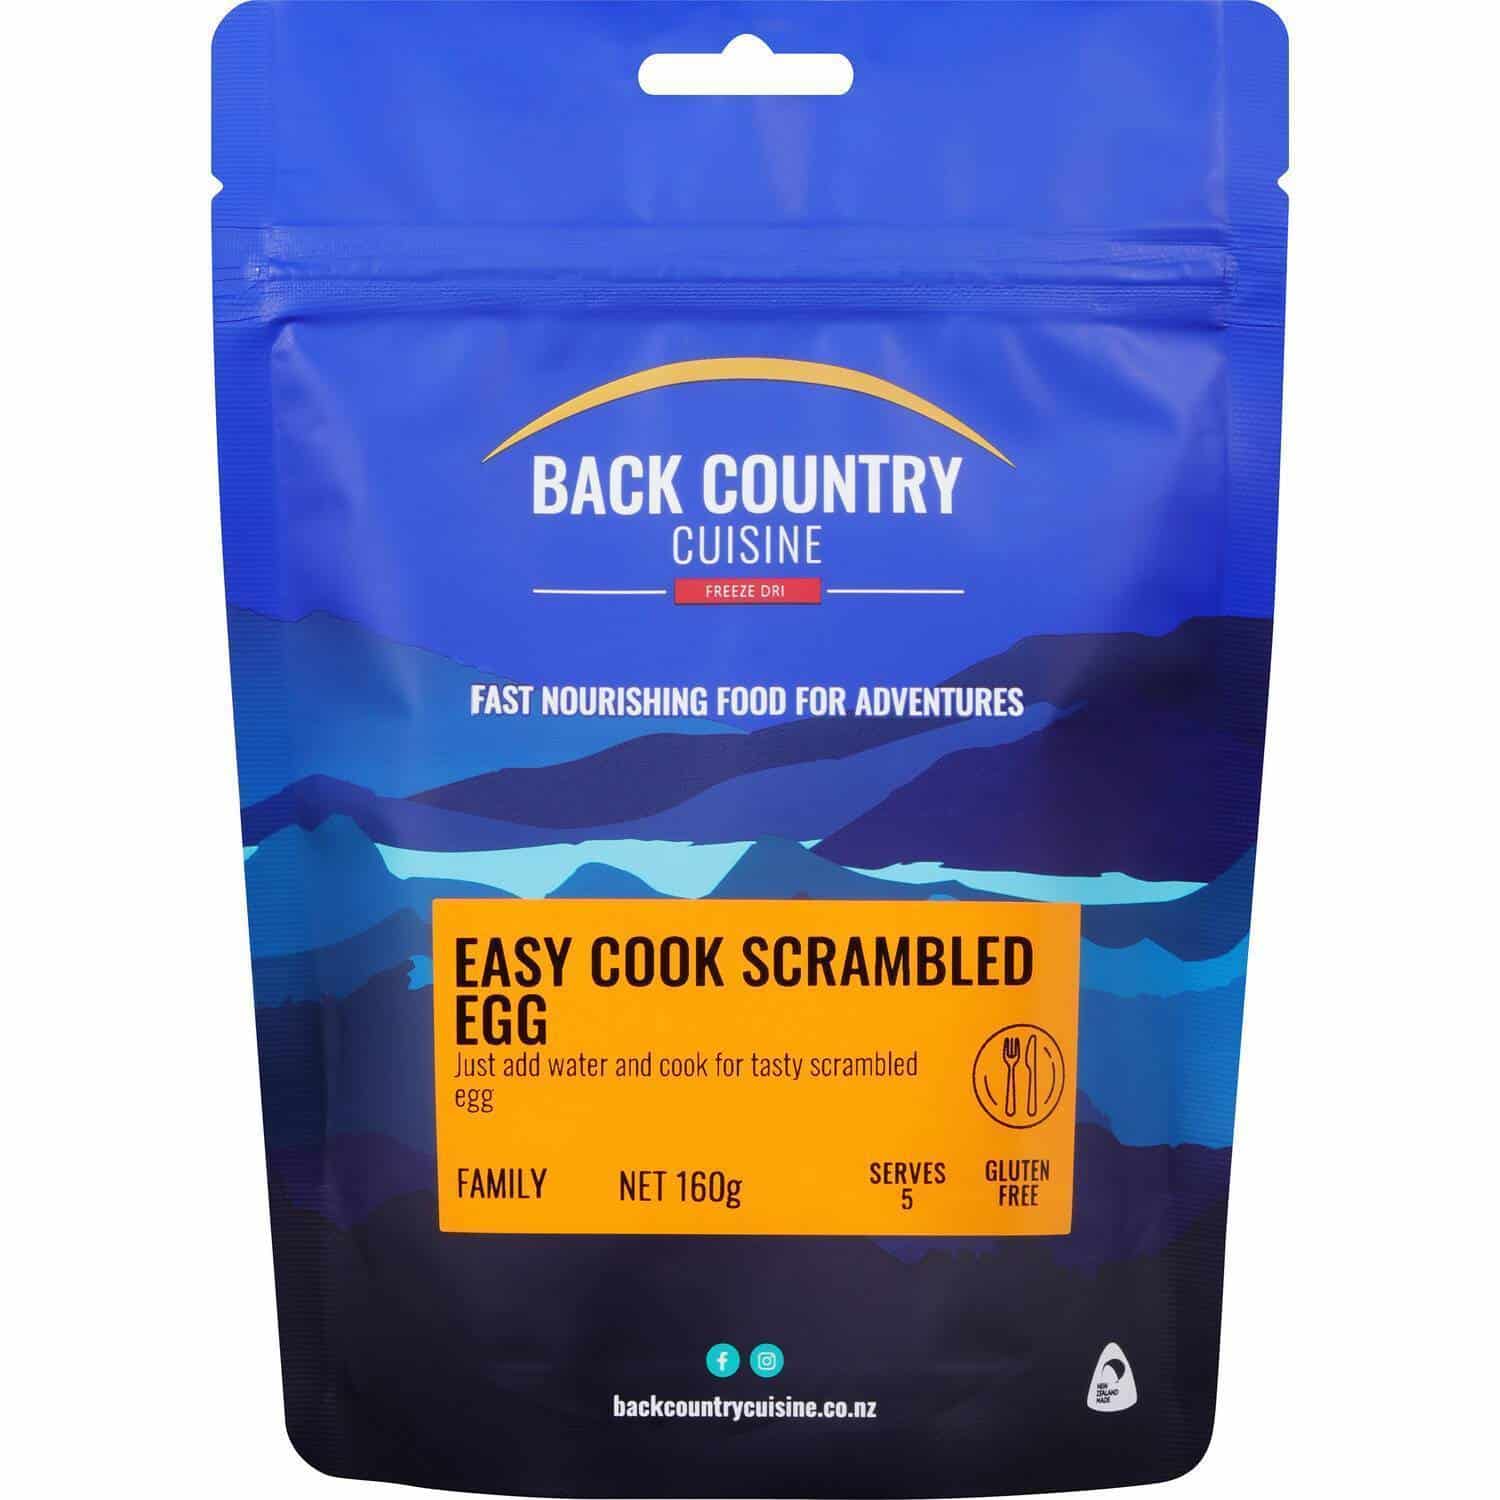 Back Country Cuisine Easy Cook Scrambled Egg - Tramping Food and Accessories sold by Venture Outdoors NZ